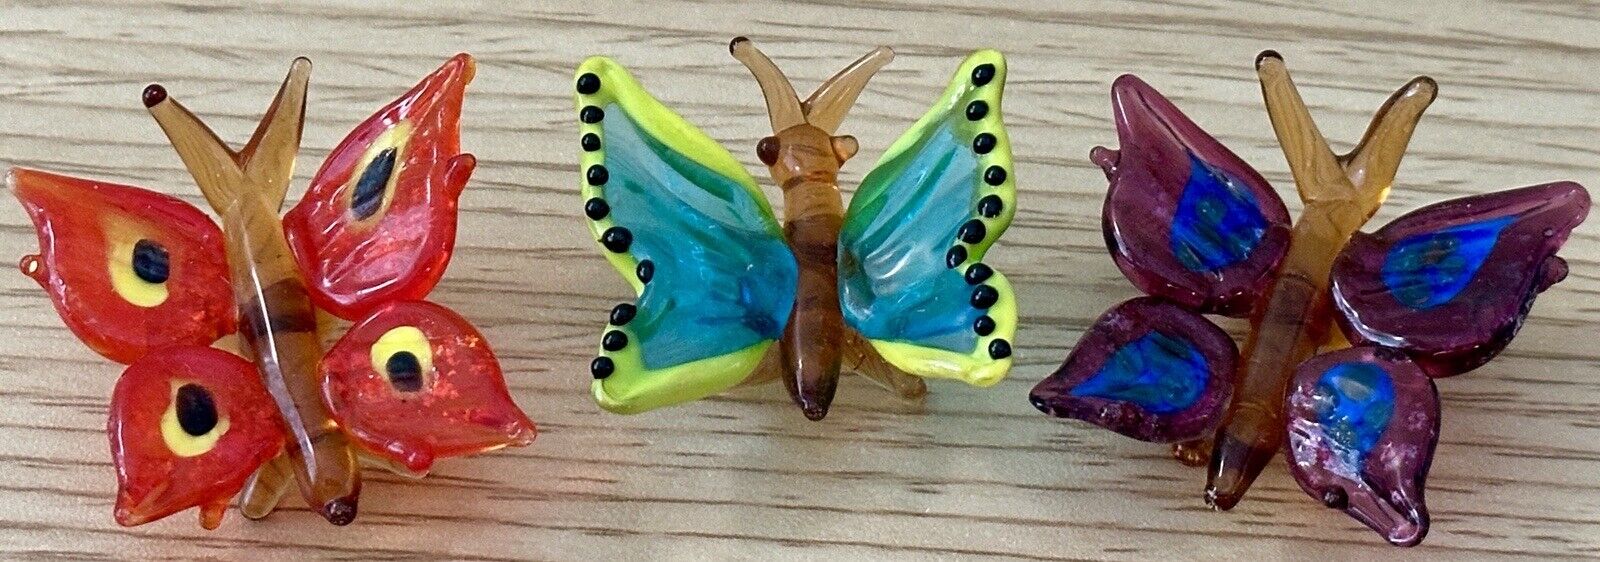 Lenox Beautiful Glass Multicolor Butterflies Red/Yell Blue/Purp Green/Yell 1.5”